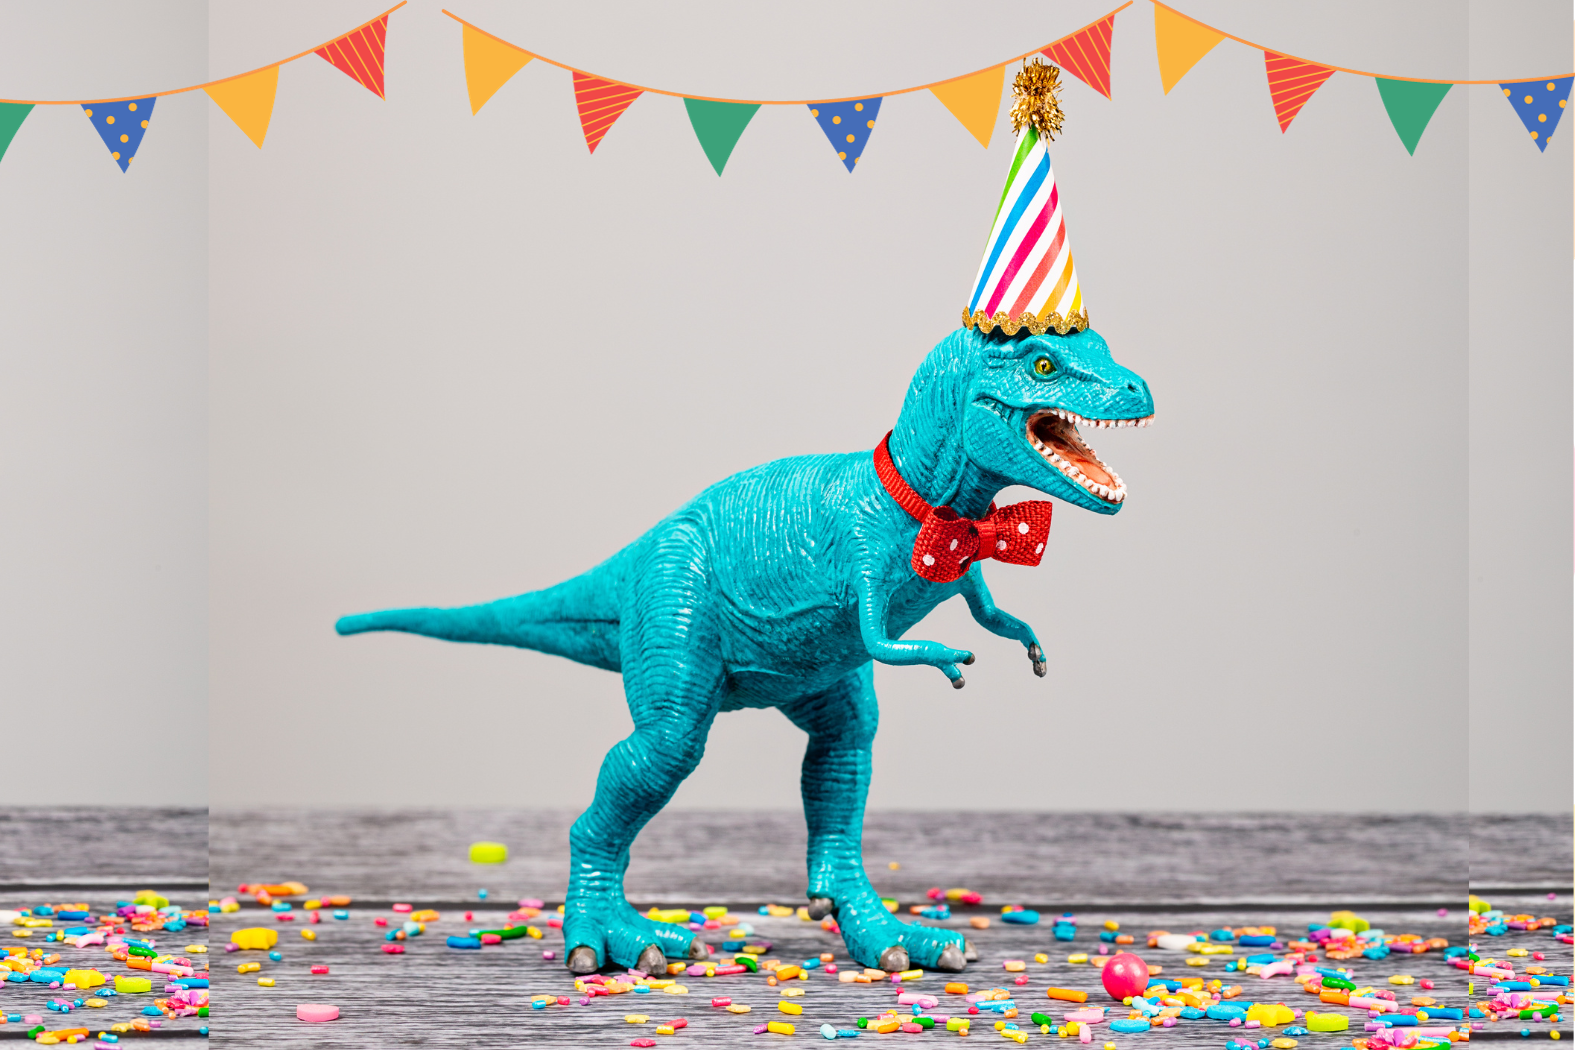 Image of a plastic dinosaur with a party hat on.